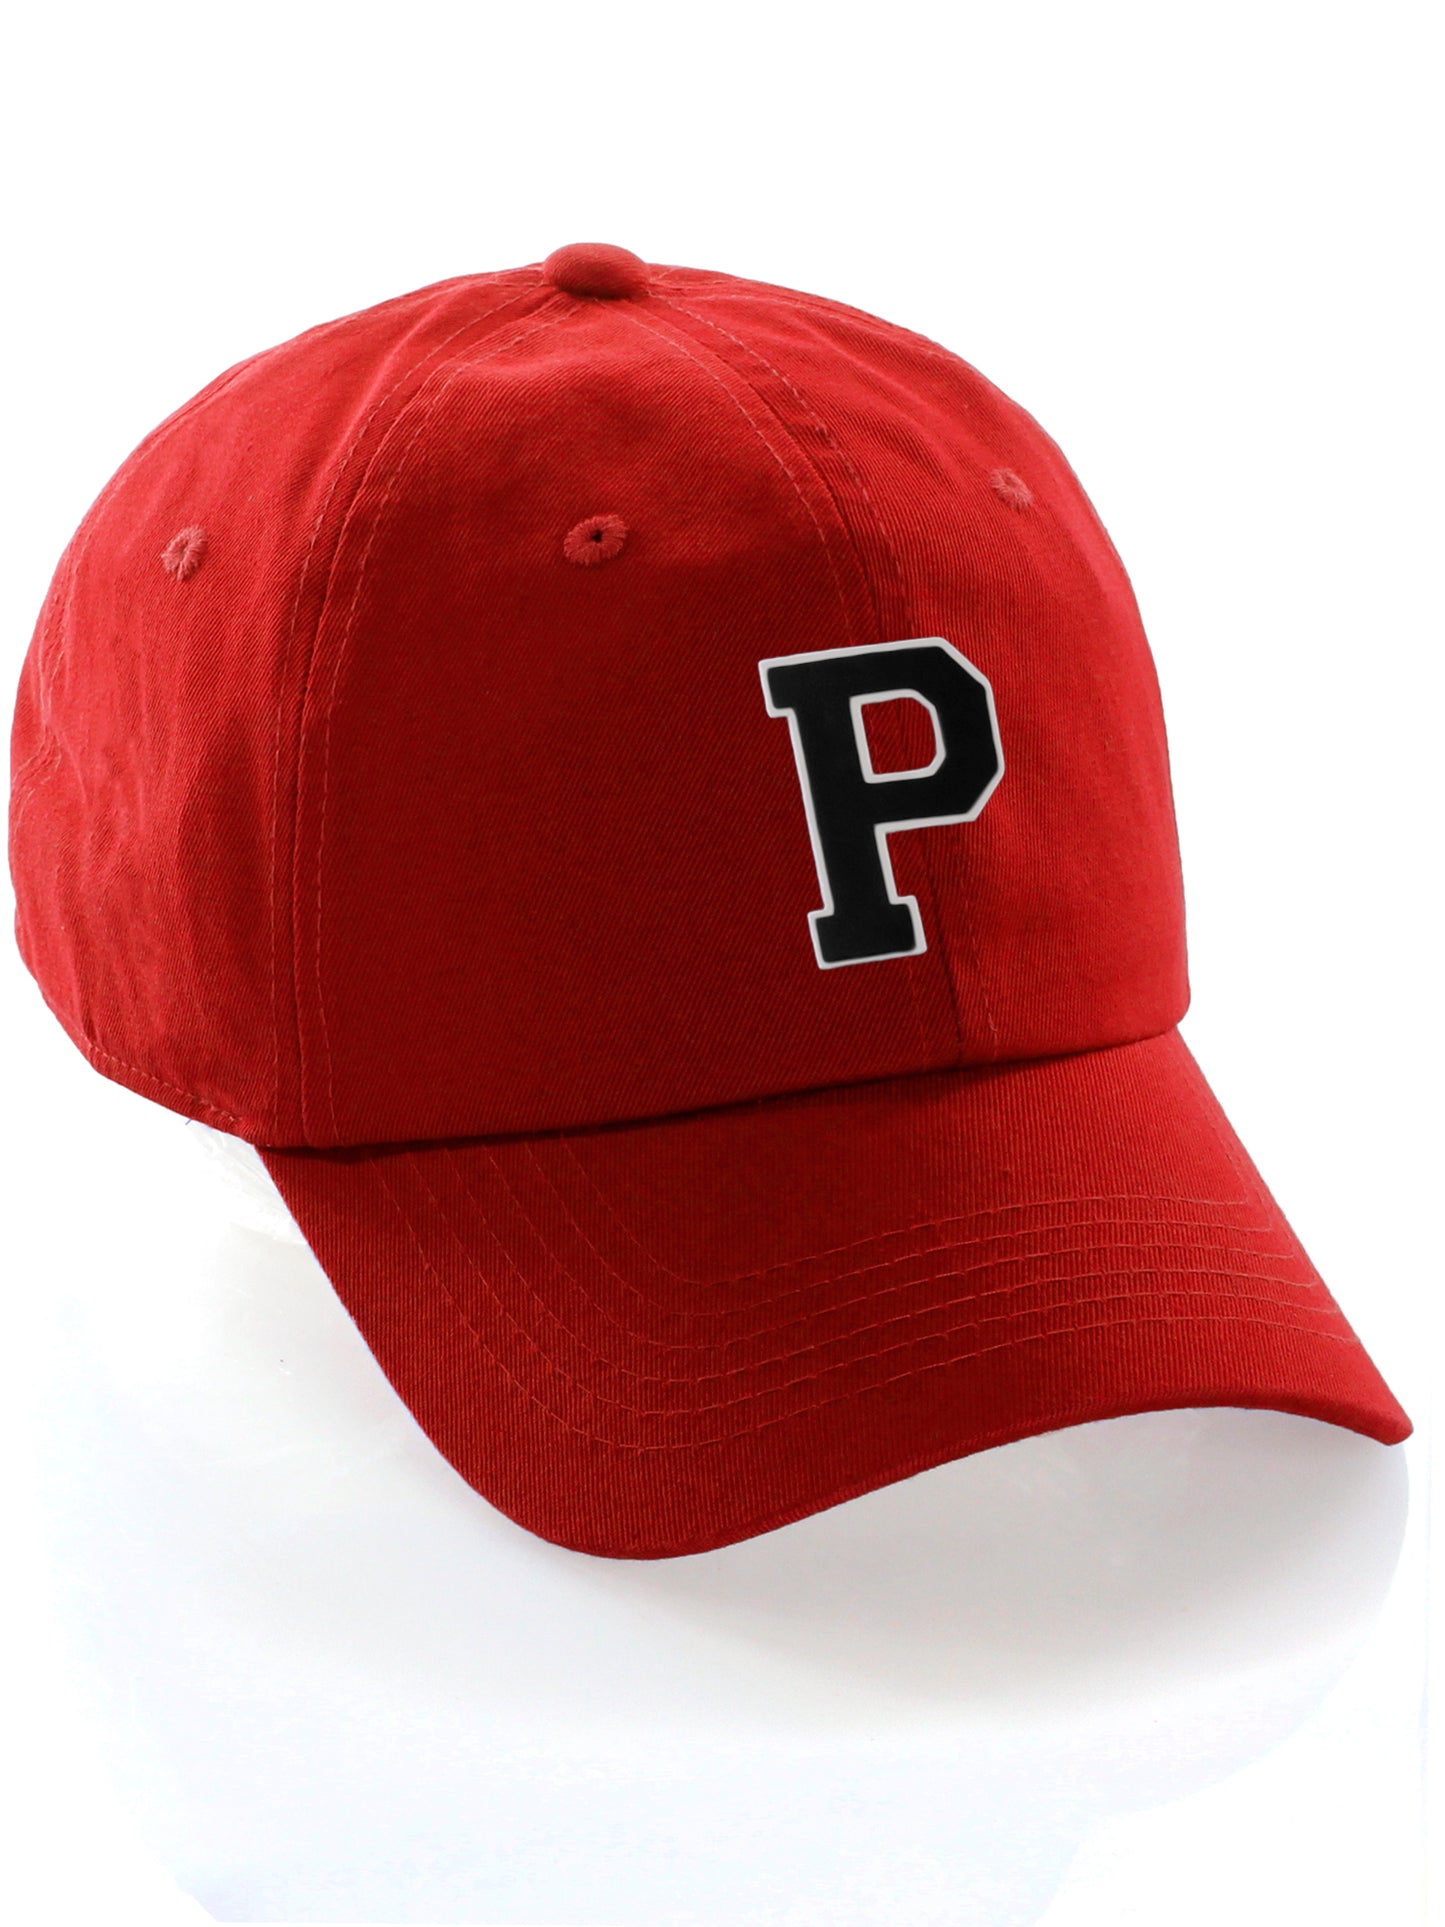 Customized Letter Initial Baseball Hat A to Z Team Colors, Red Cap White Black